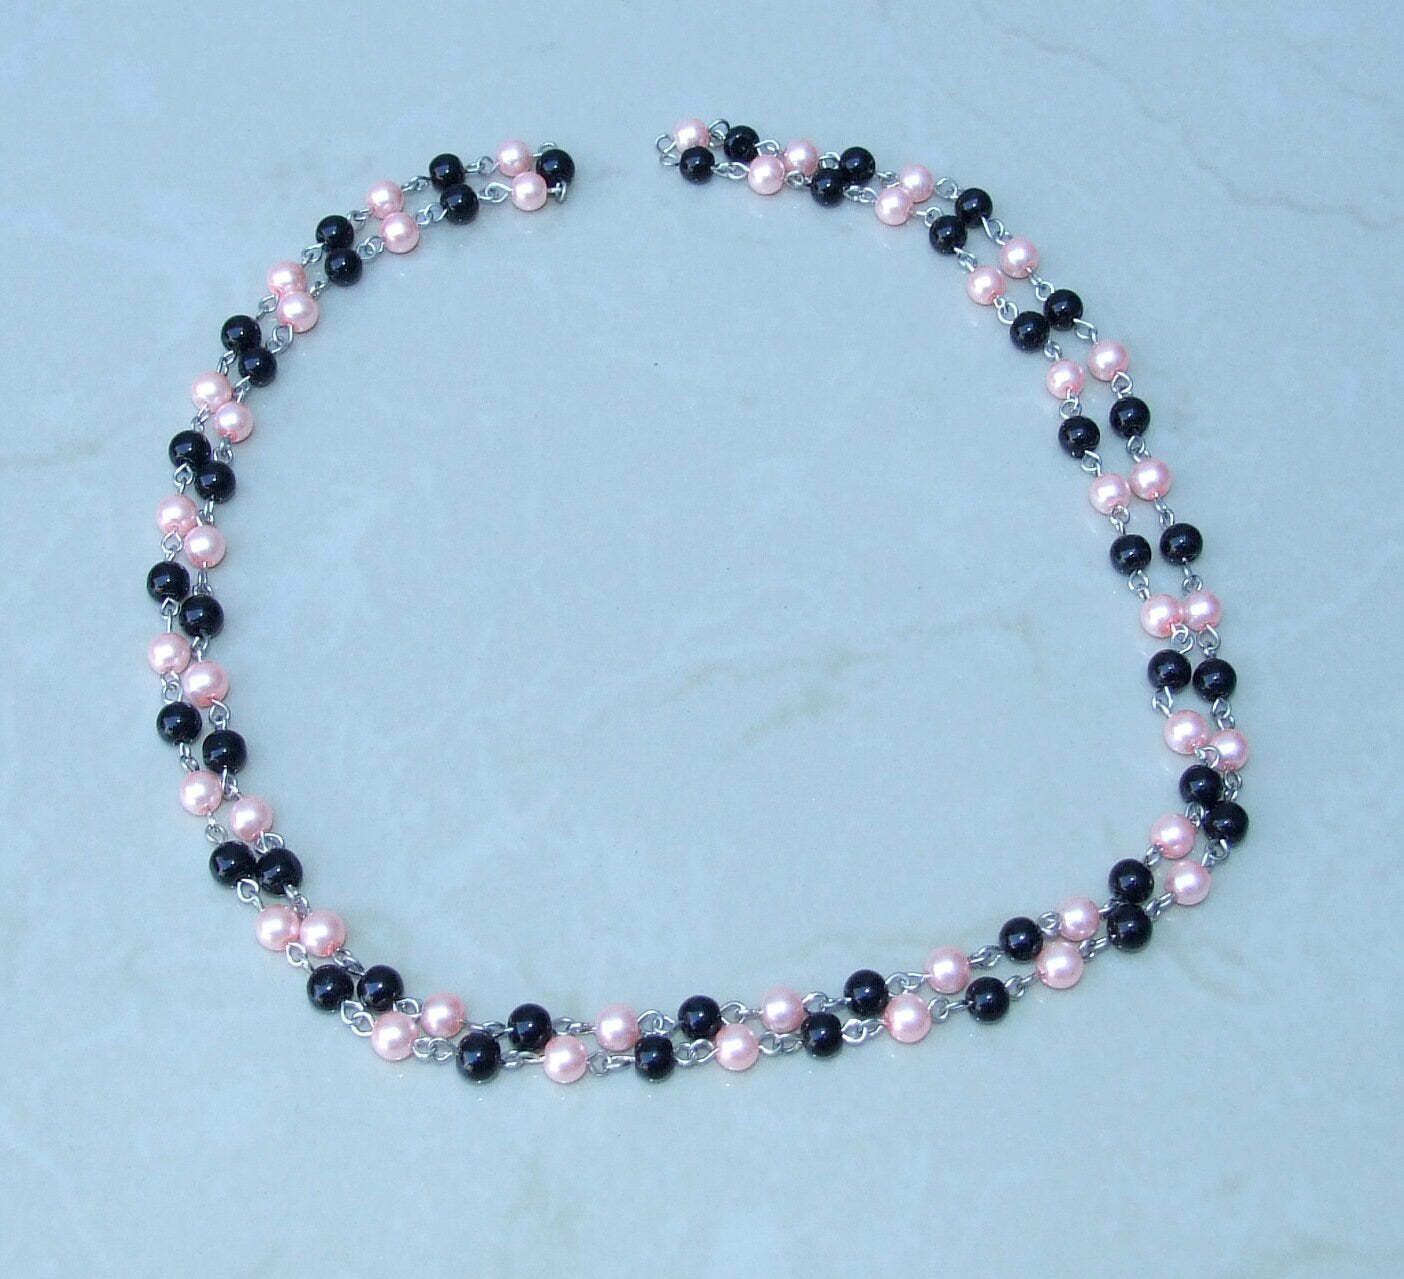 Black & Pink Pearl Rosary Chain, 1 Meter, Glass Beads, Beaded Chain, Body Chain Jewelry, Silver Chain, Necklace Chain, Belly Chain, 6mm, 402